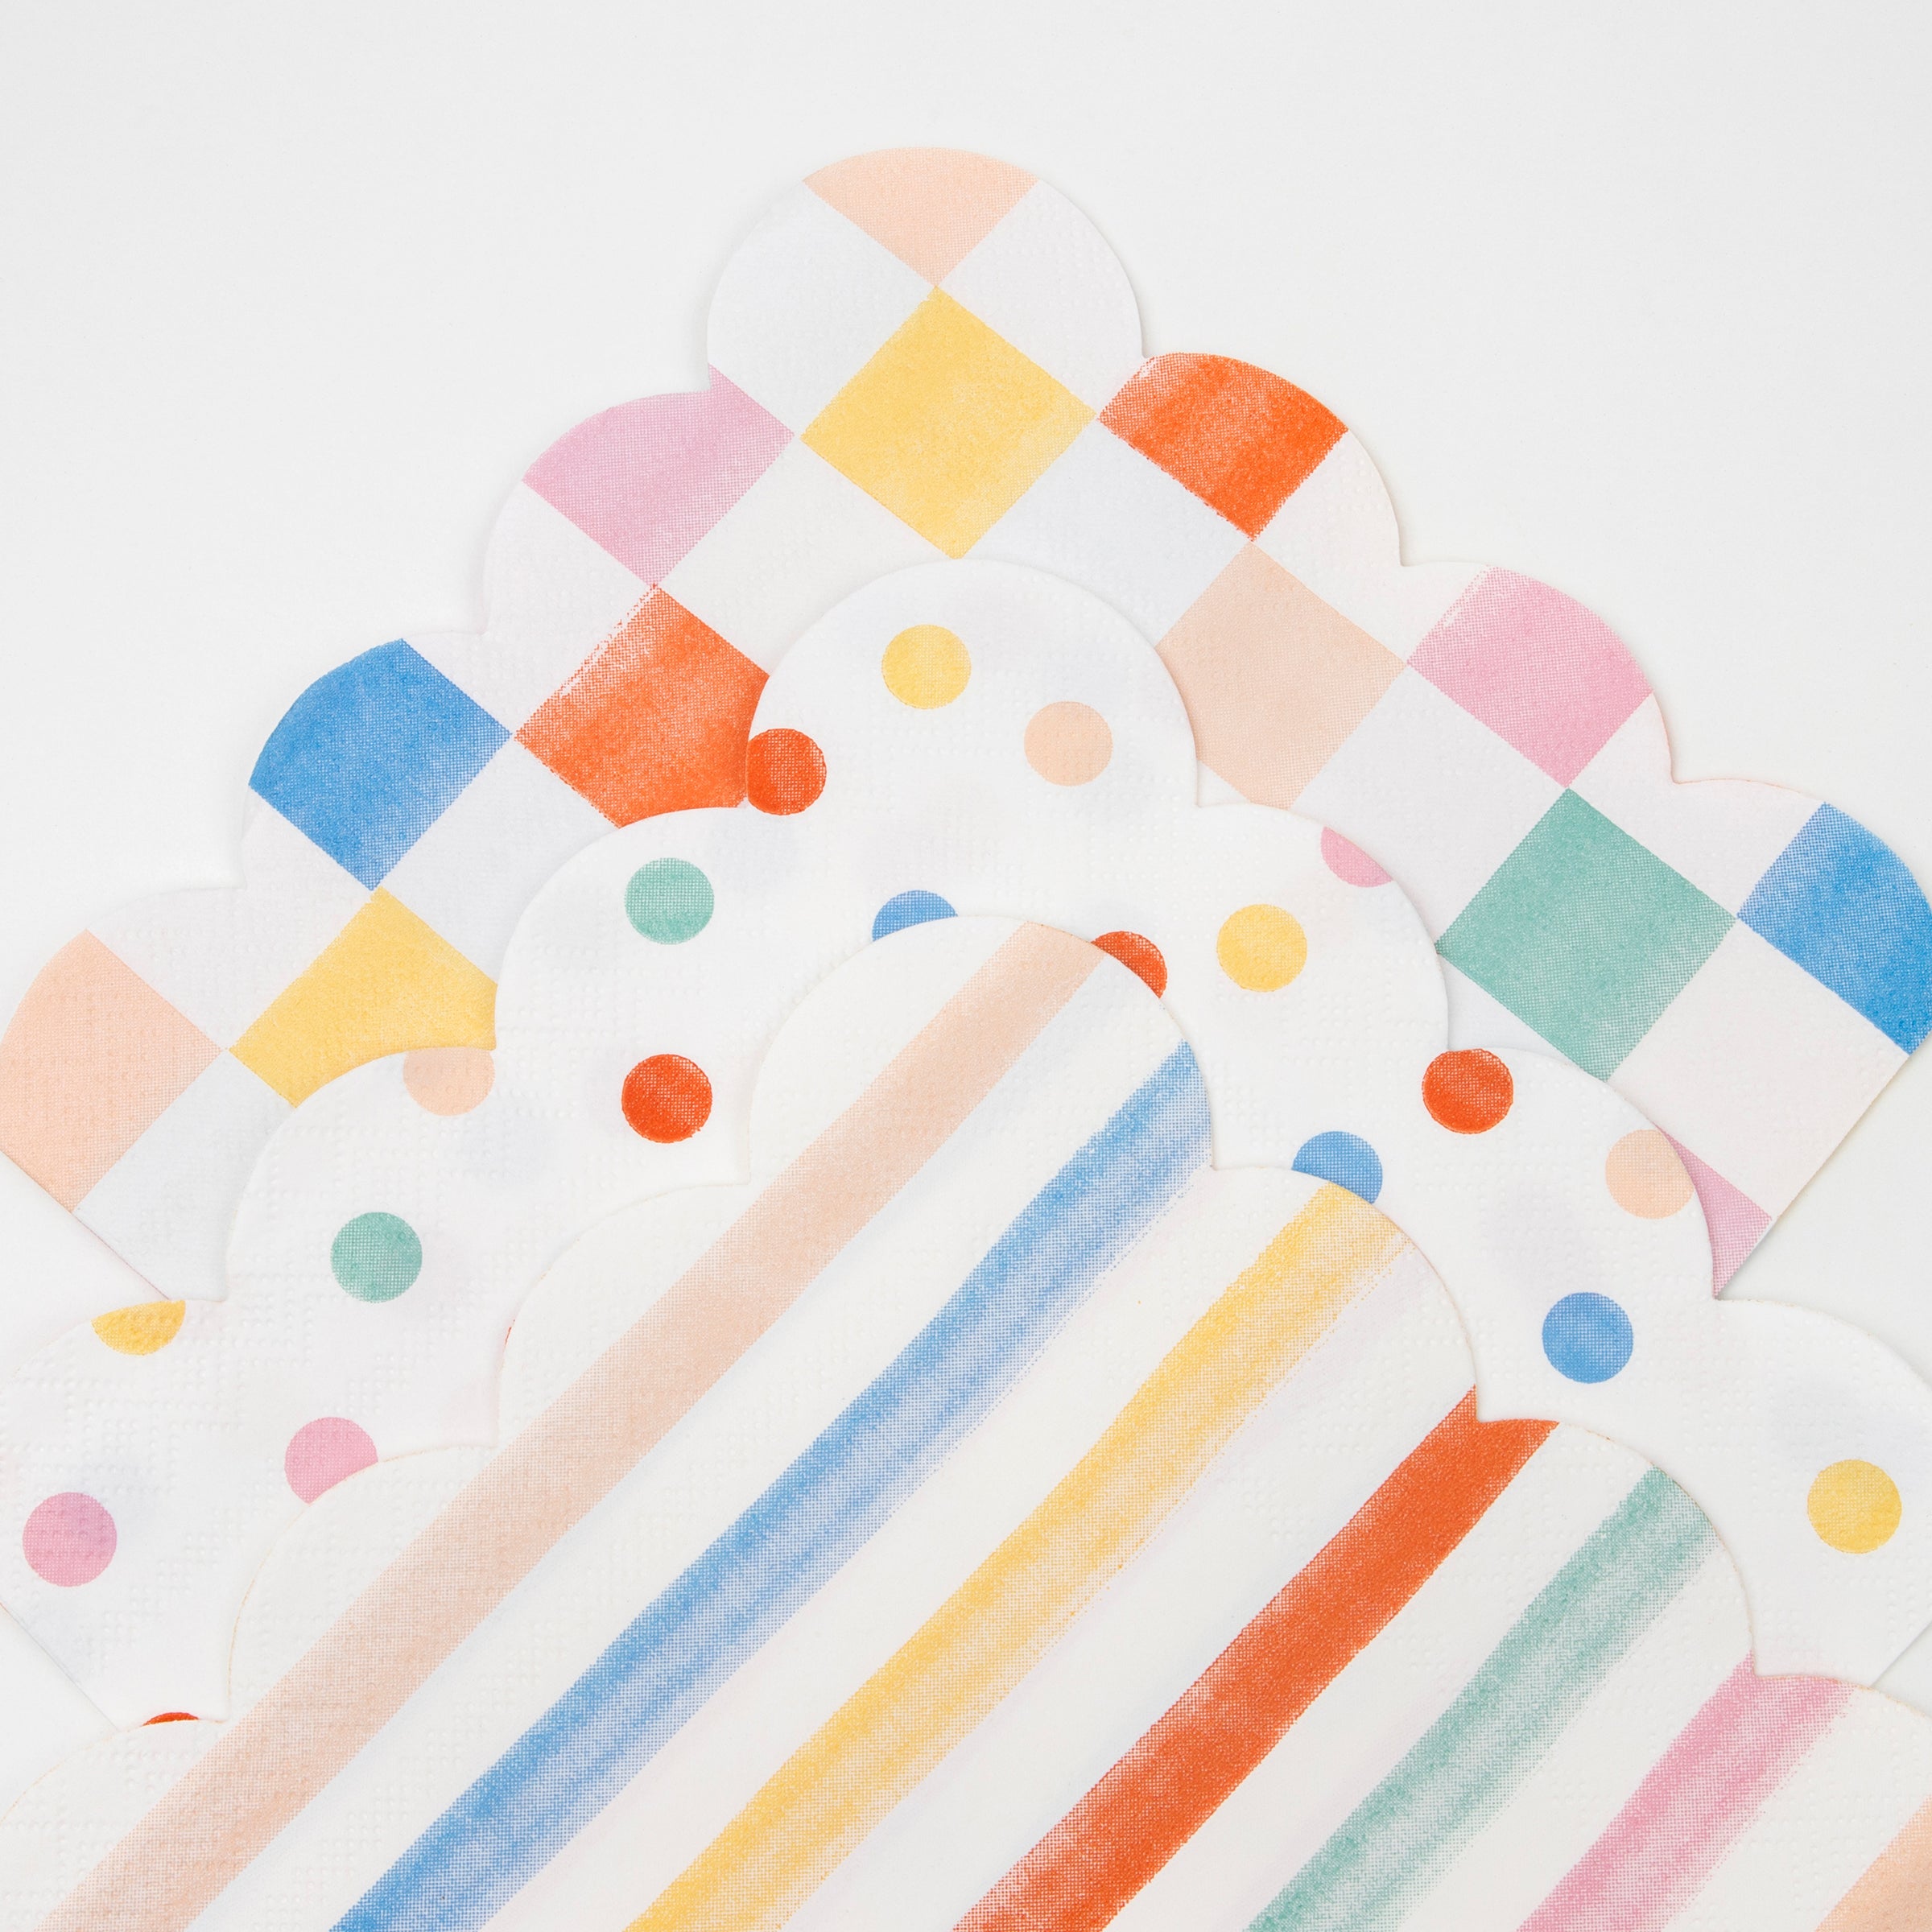 Our party napkins feature bright colors, perfect as party table decorations.